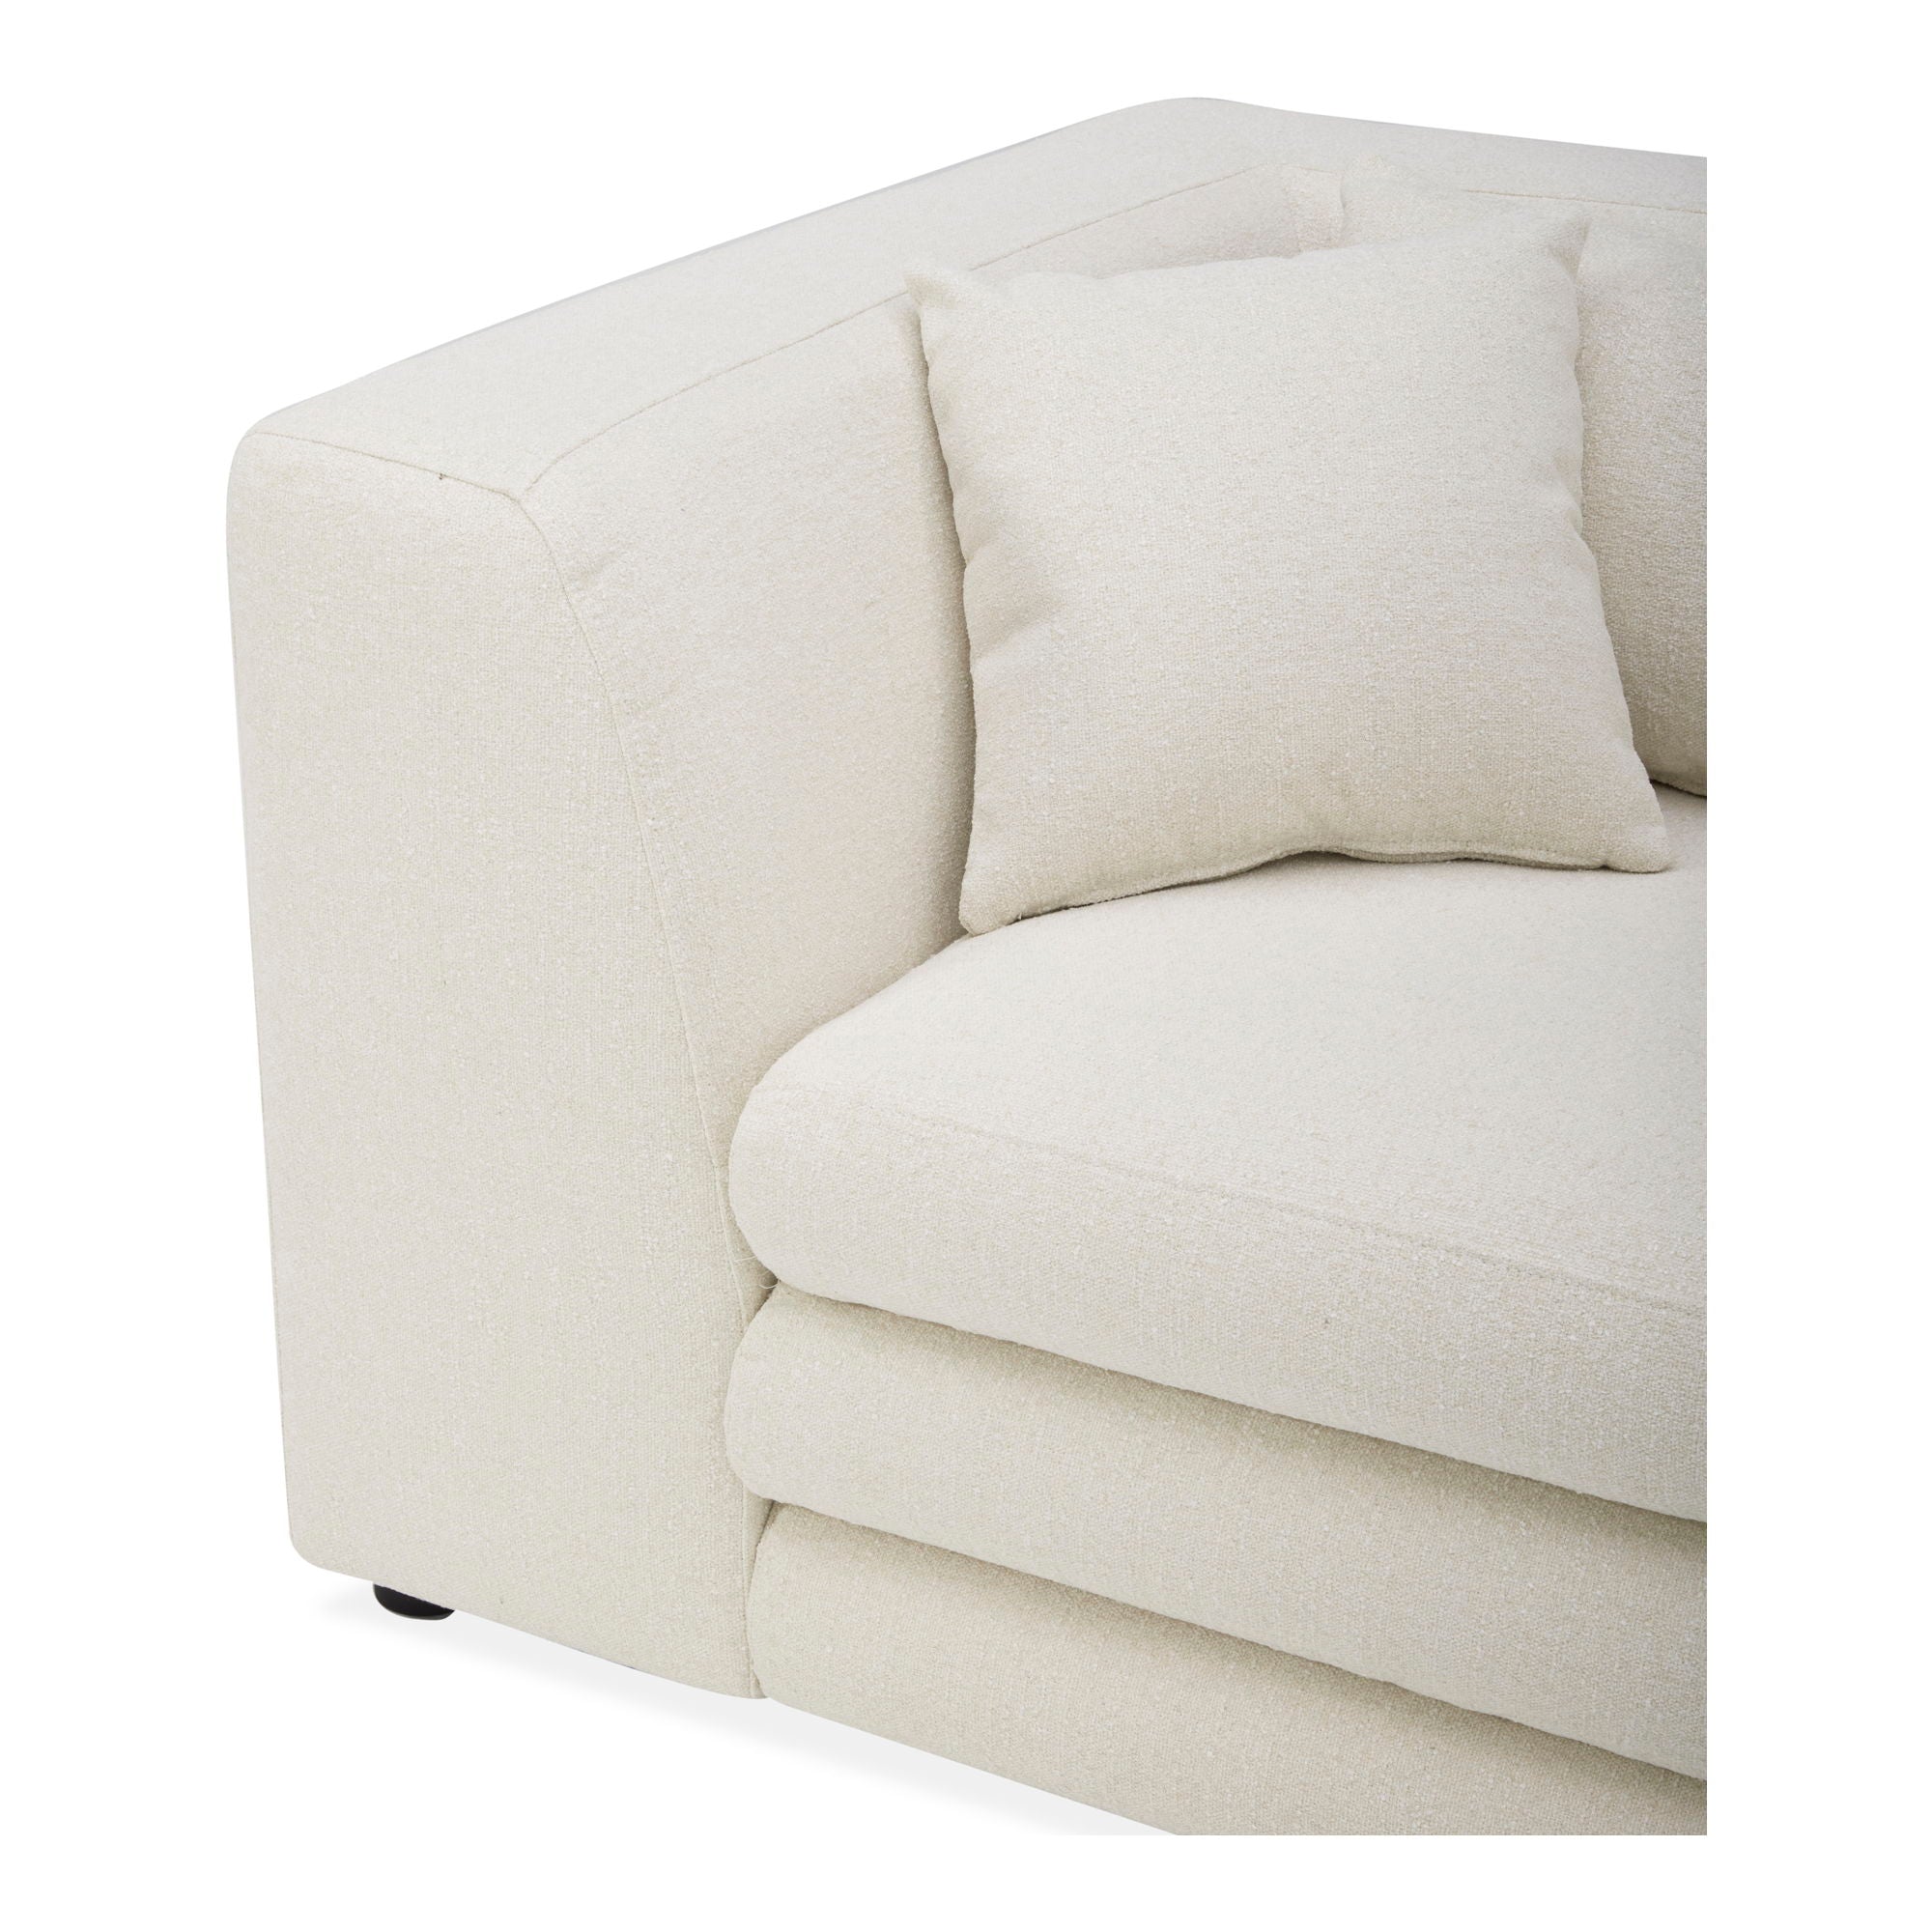 Lowtide - Classic L Modular Sectional - Warm White-Stationary Sectionals-American Furniture Outlet